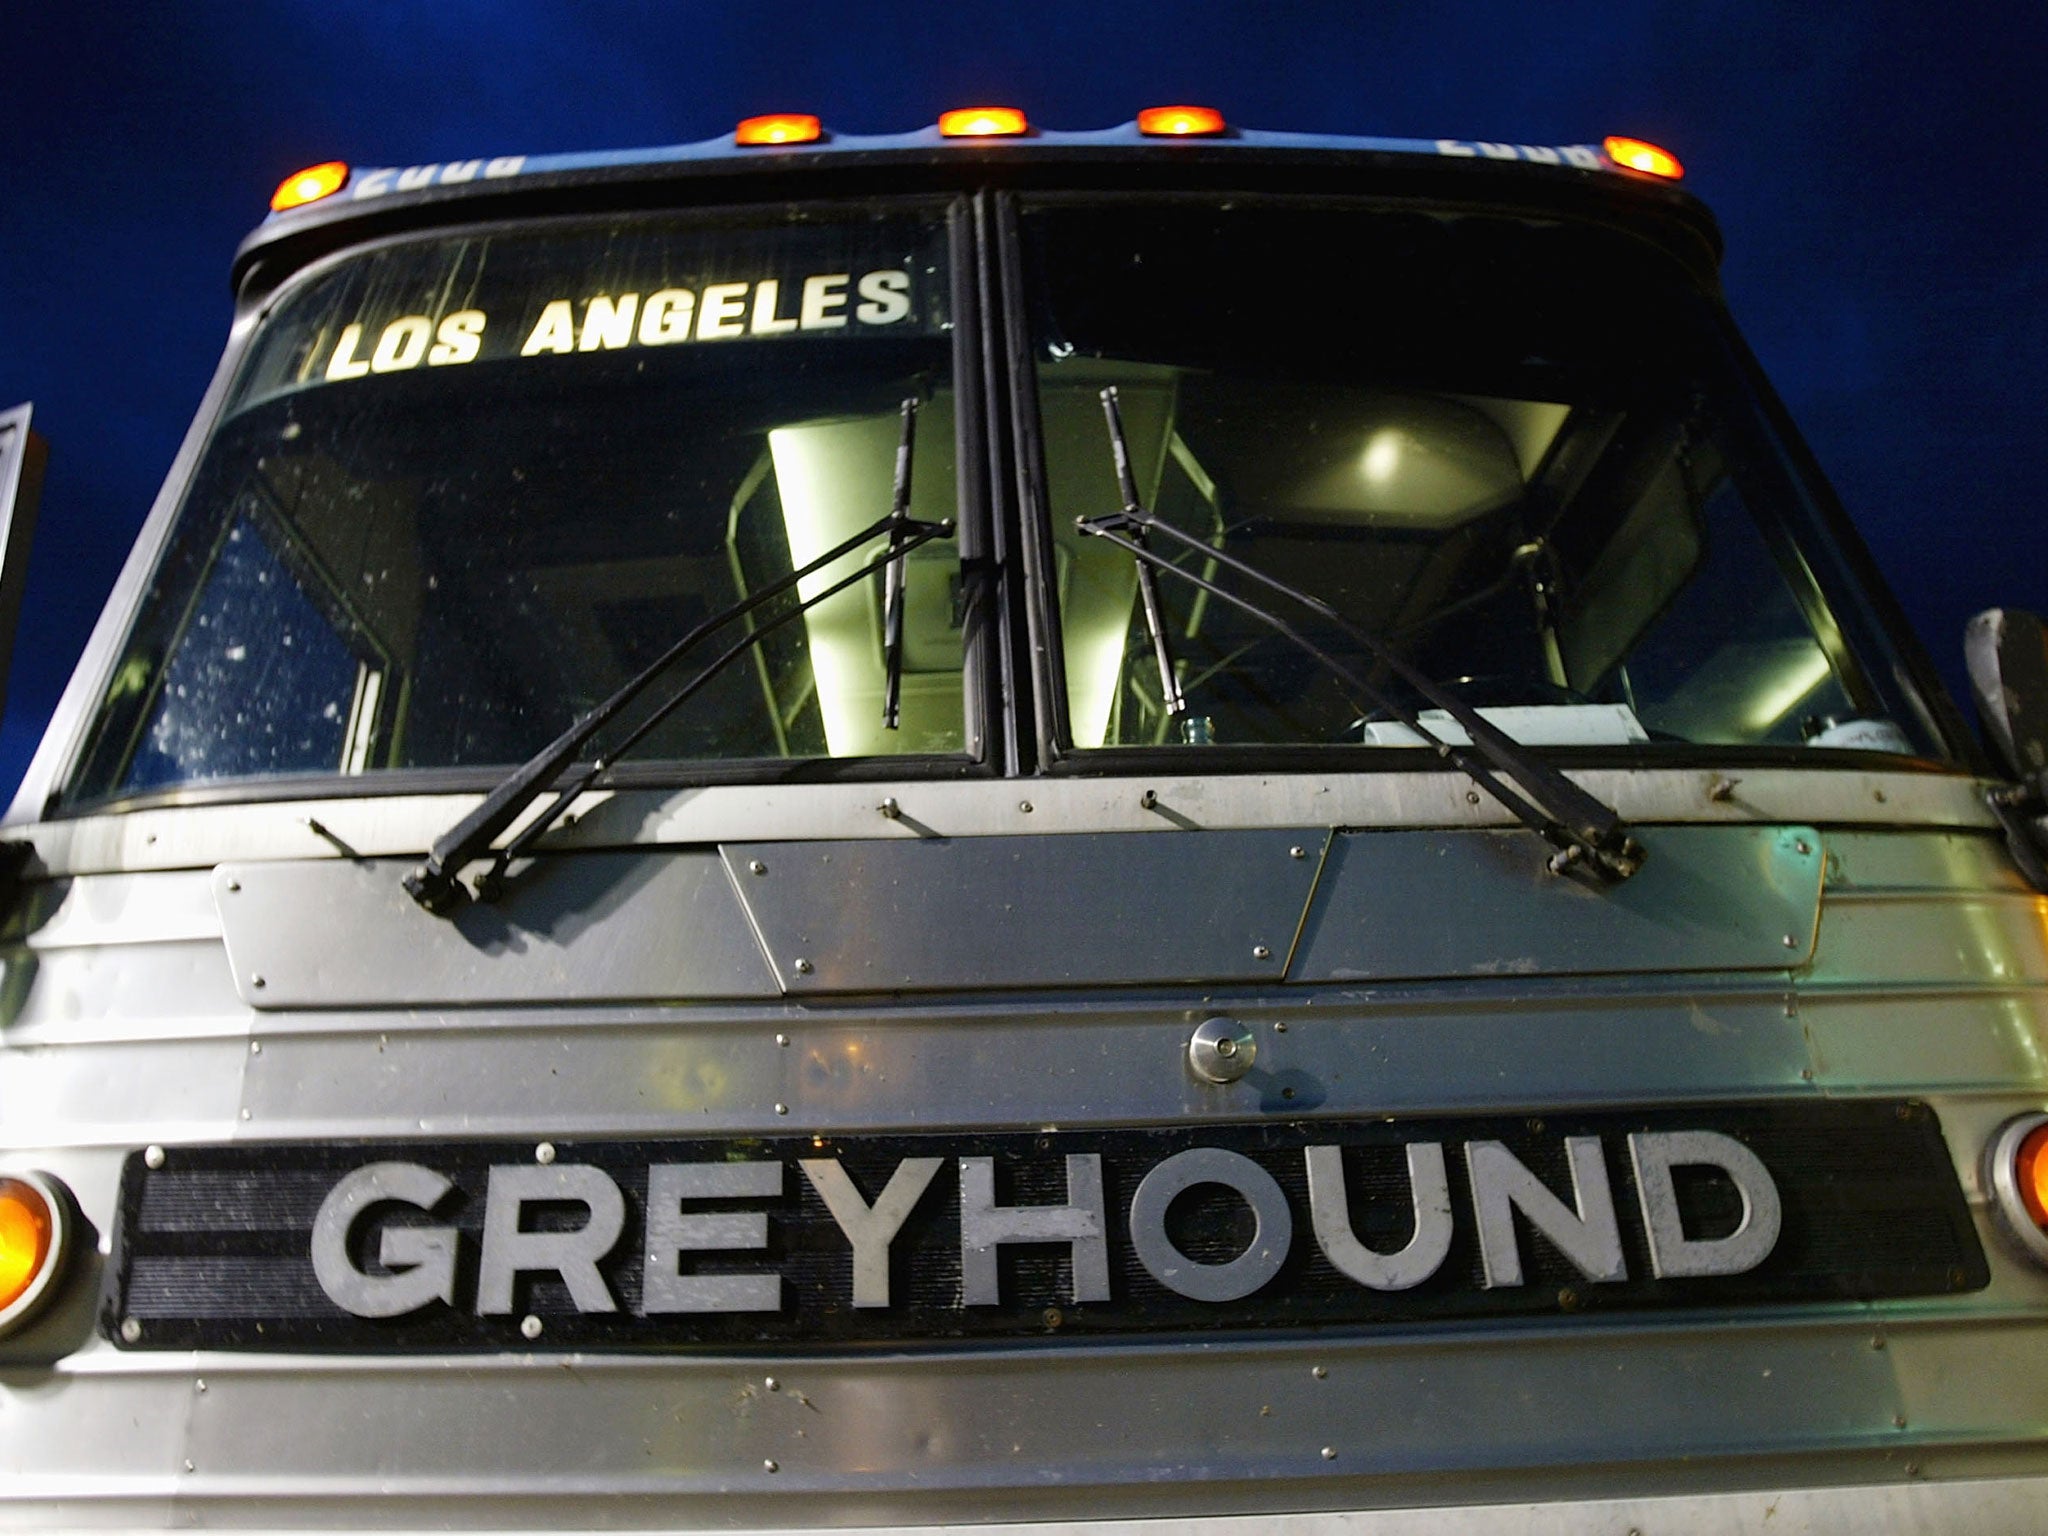 FirstGroup has rejected pressure from a US investor to sell-off its North American bus business, Greyhound, in a bid to boost shareholder value.